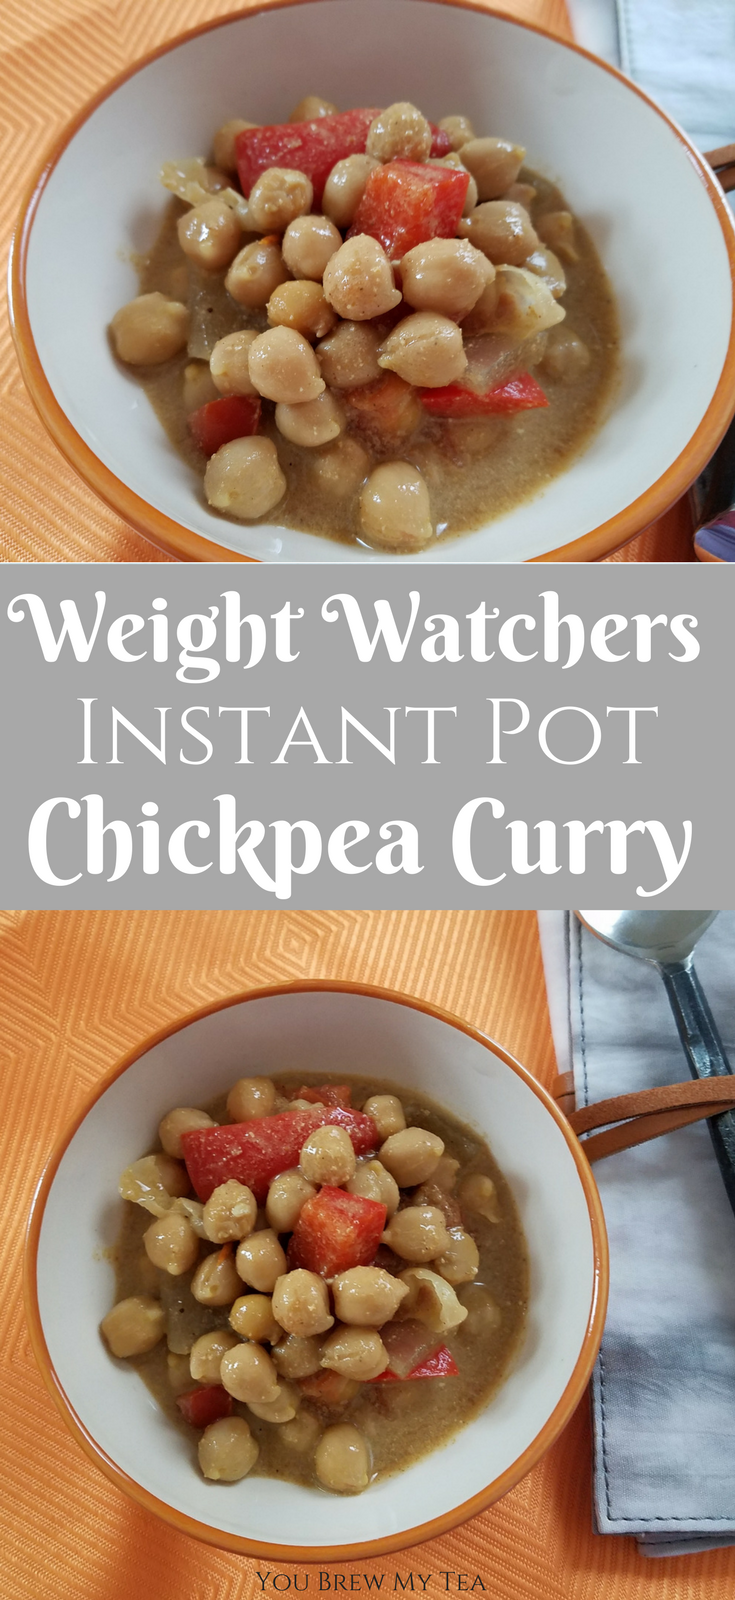 Use your Instant Pot to make a great VEGAN Curry Recipe! This chickpea recipe is a perfect Weight Watchers FreeStyle side dish or complete meal! Ready in just 5 minutes!